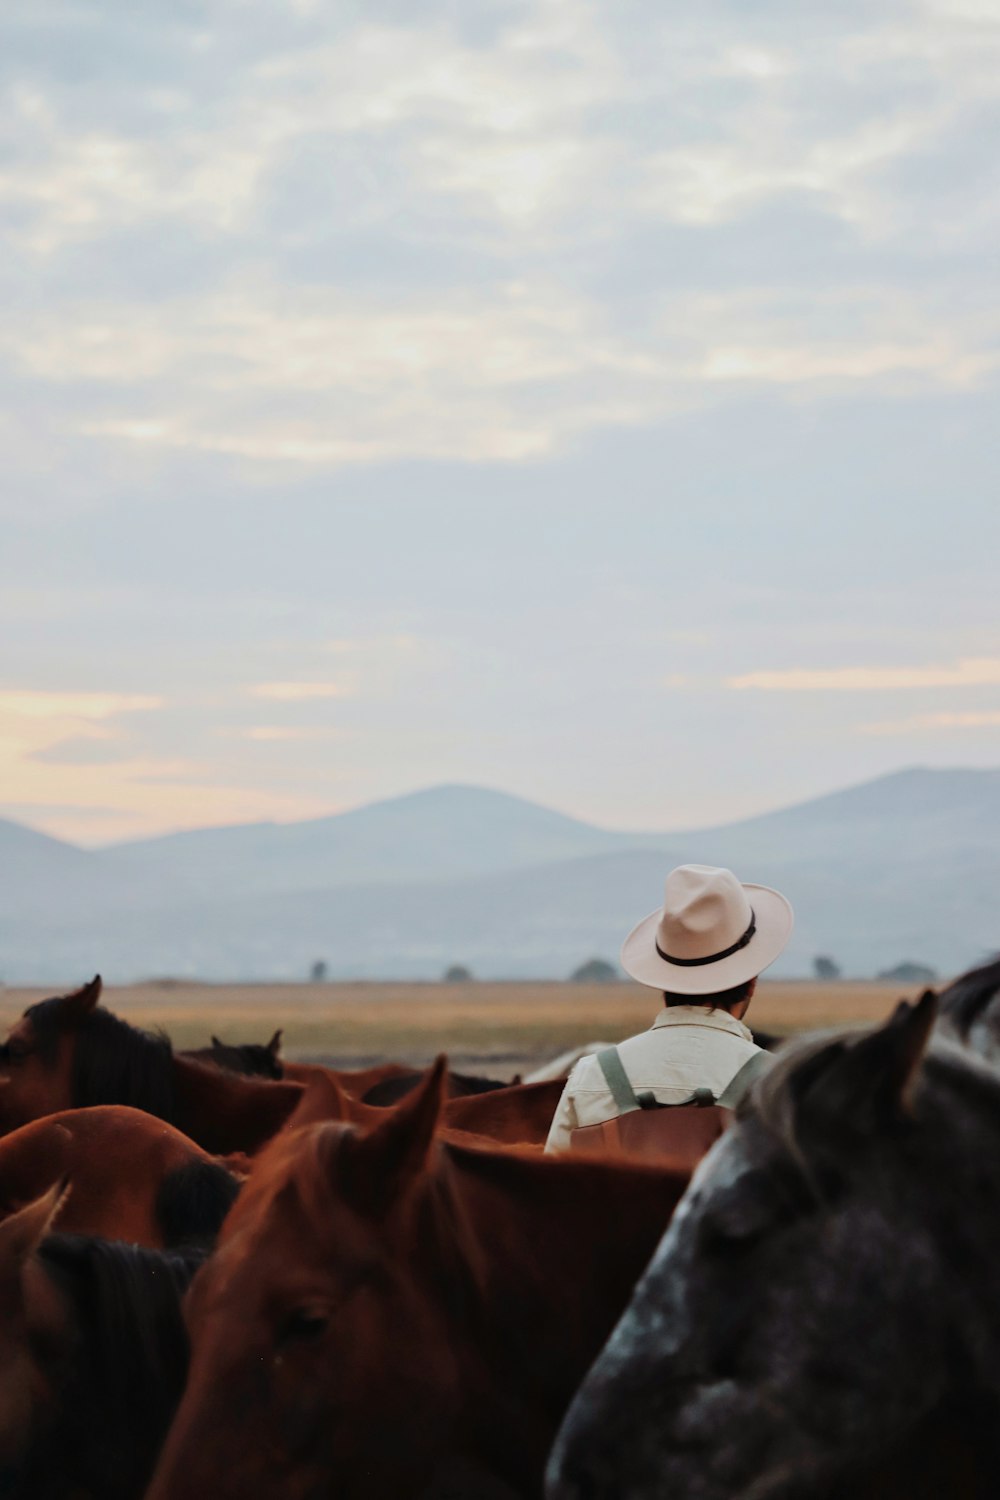 a man in a cowboy hat standing in front of a herd of horses